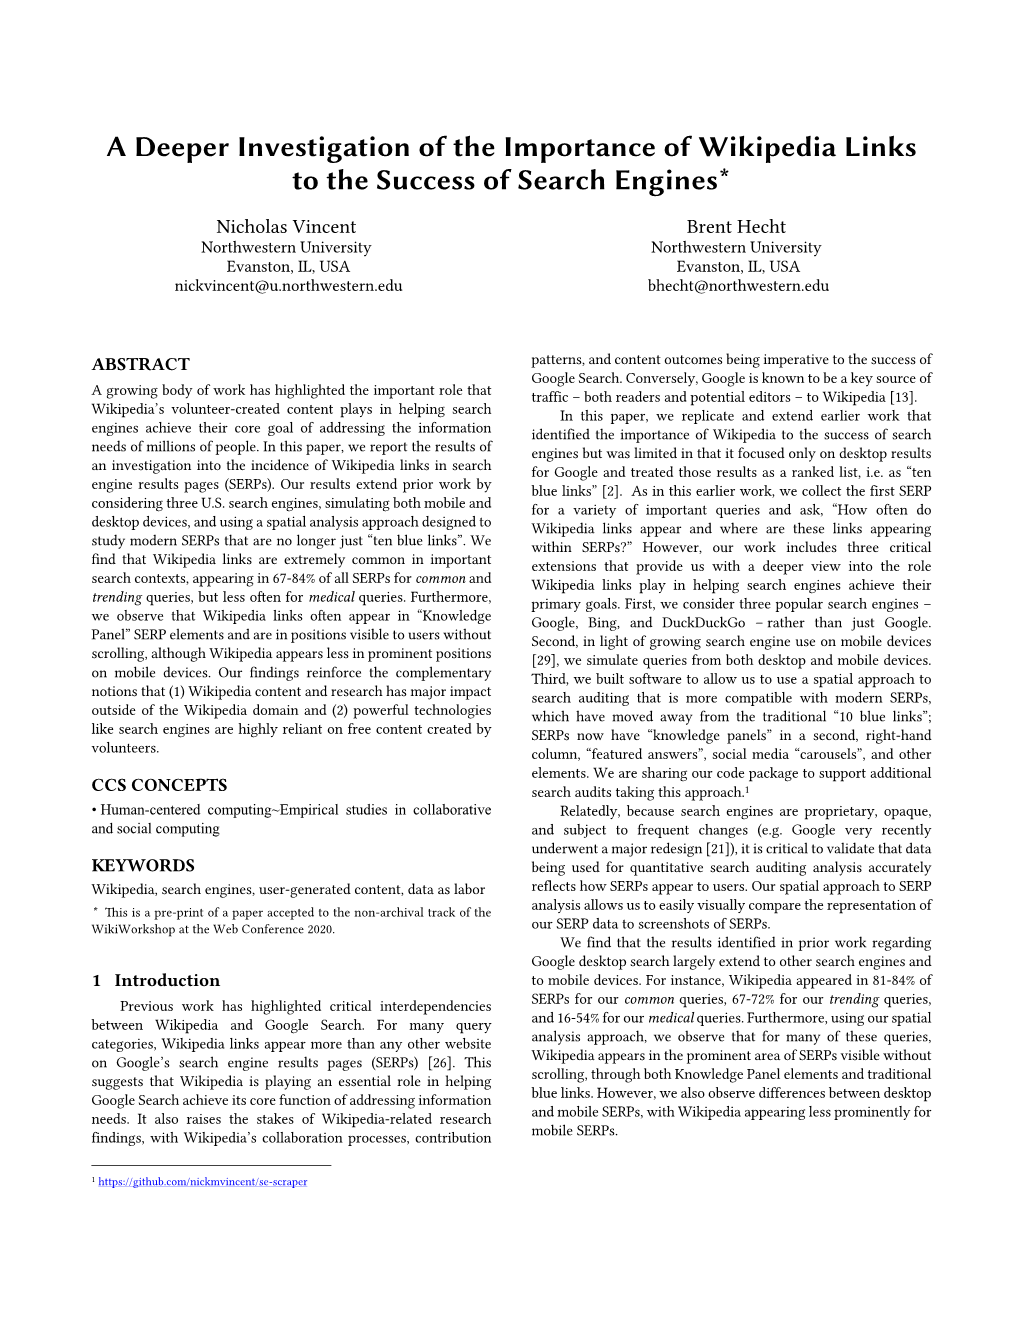 A Deeper Investigation of the Importance of Wikipedia Links to the Success of Search Engines*